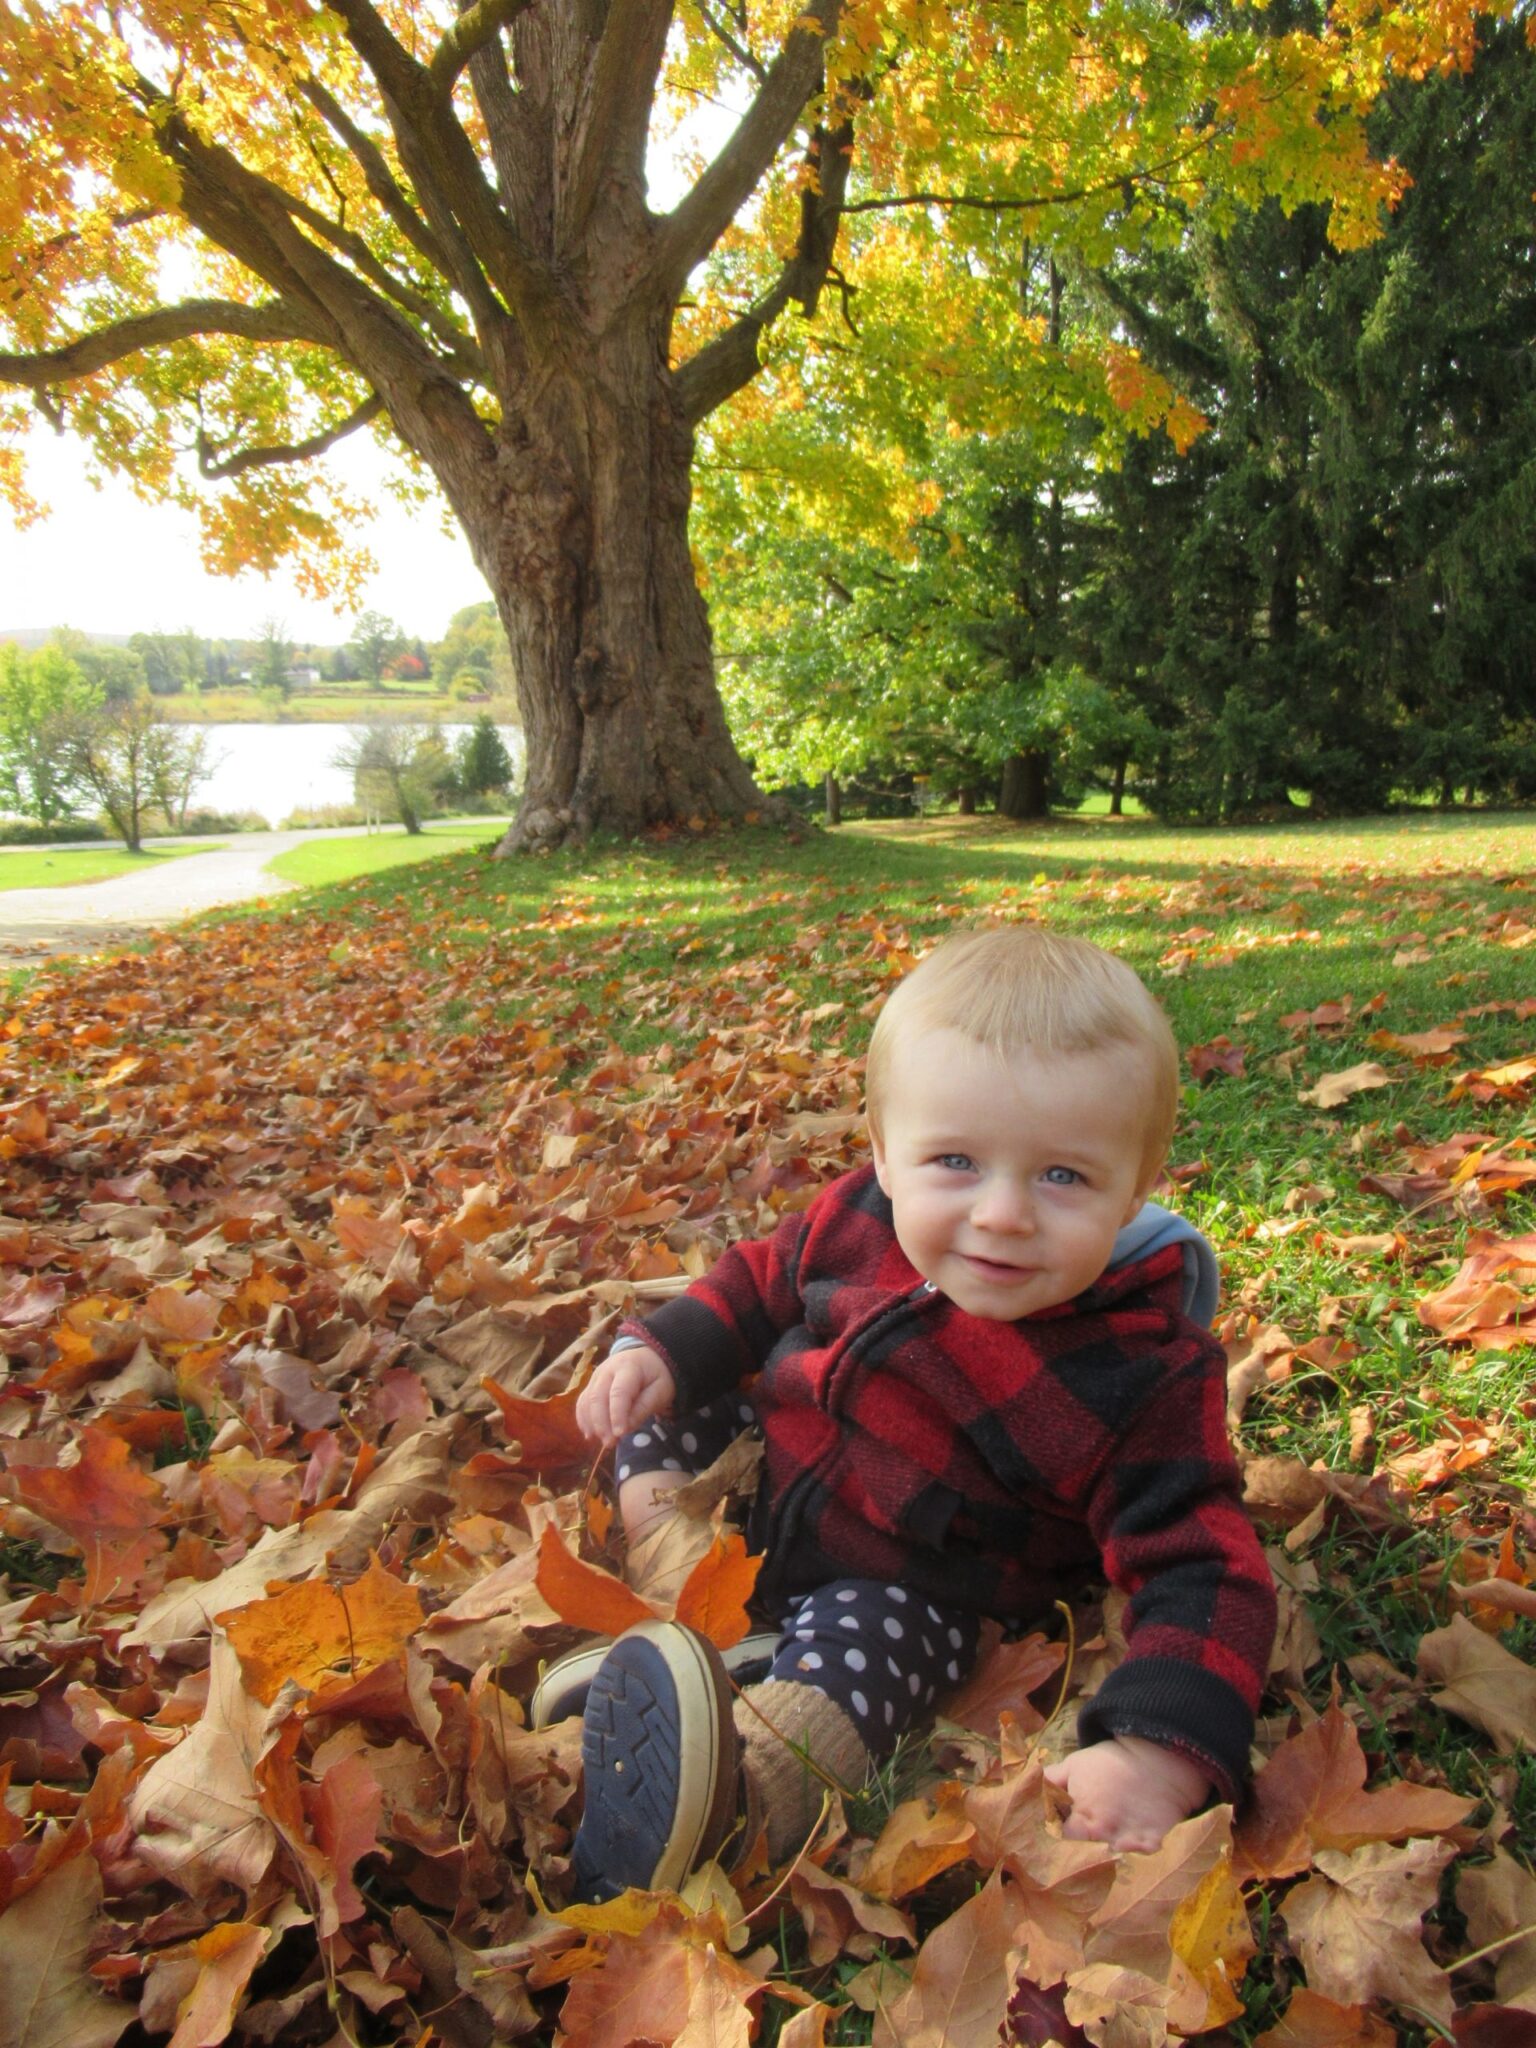 A small child in a plaid jacket sits in a pile of orange leaves outside